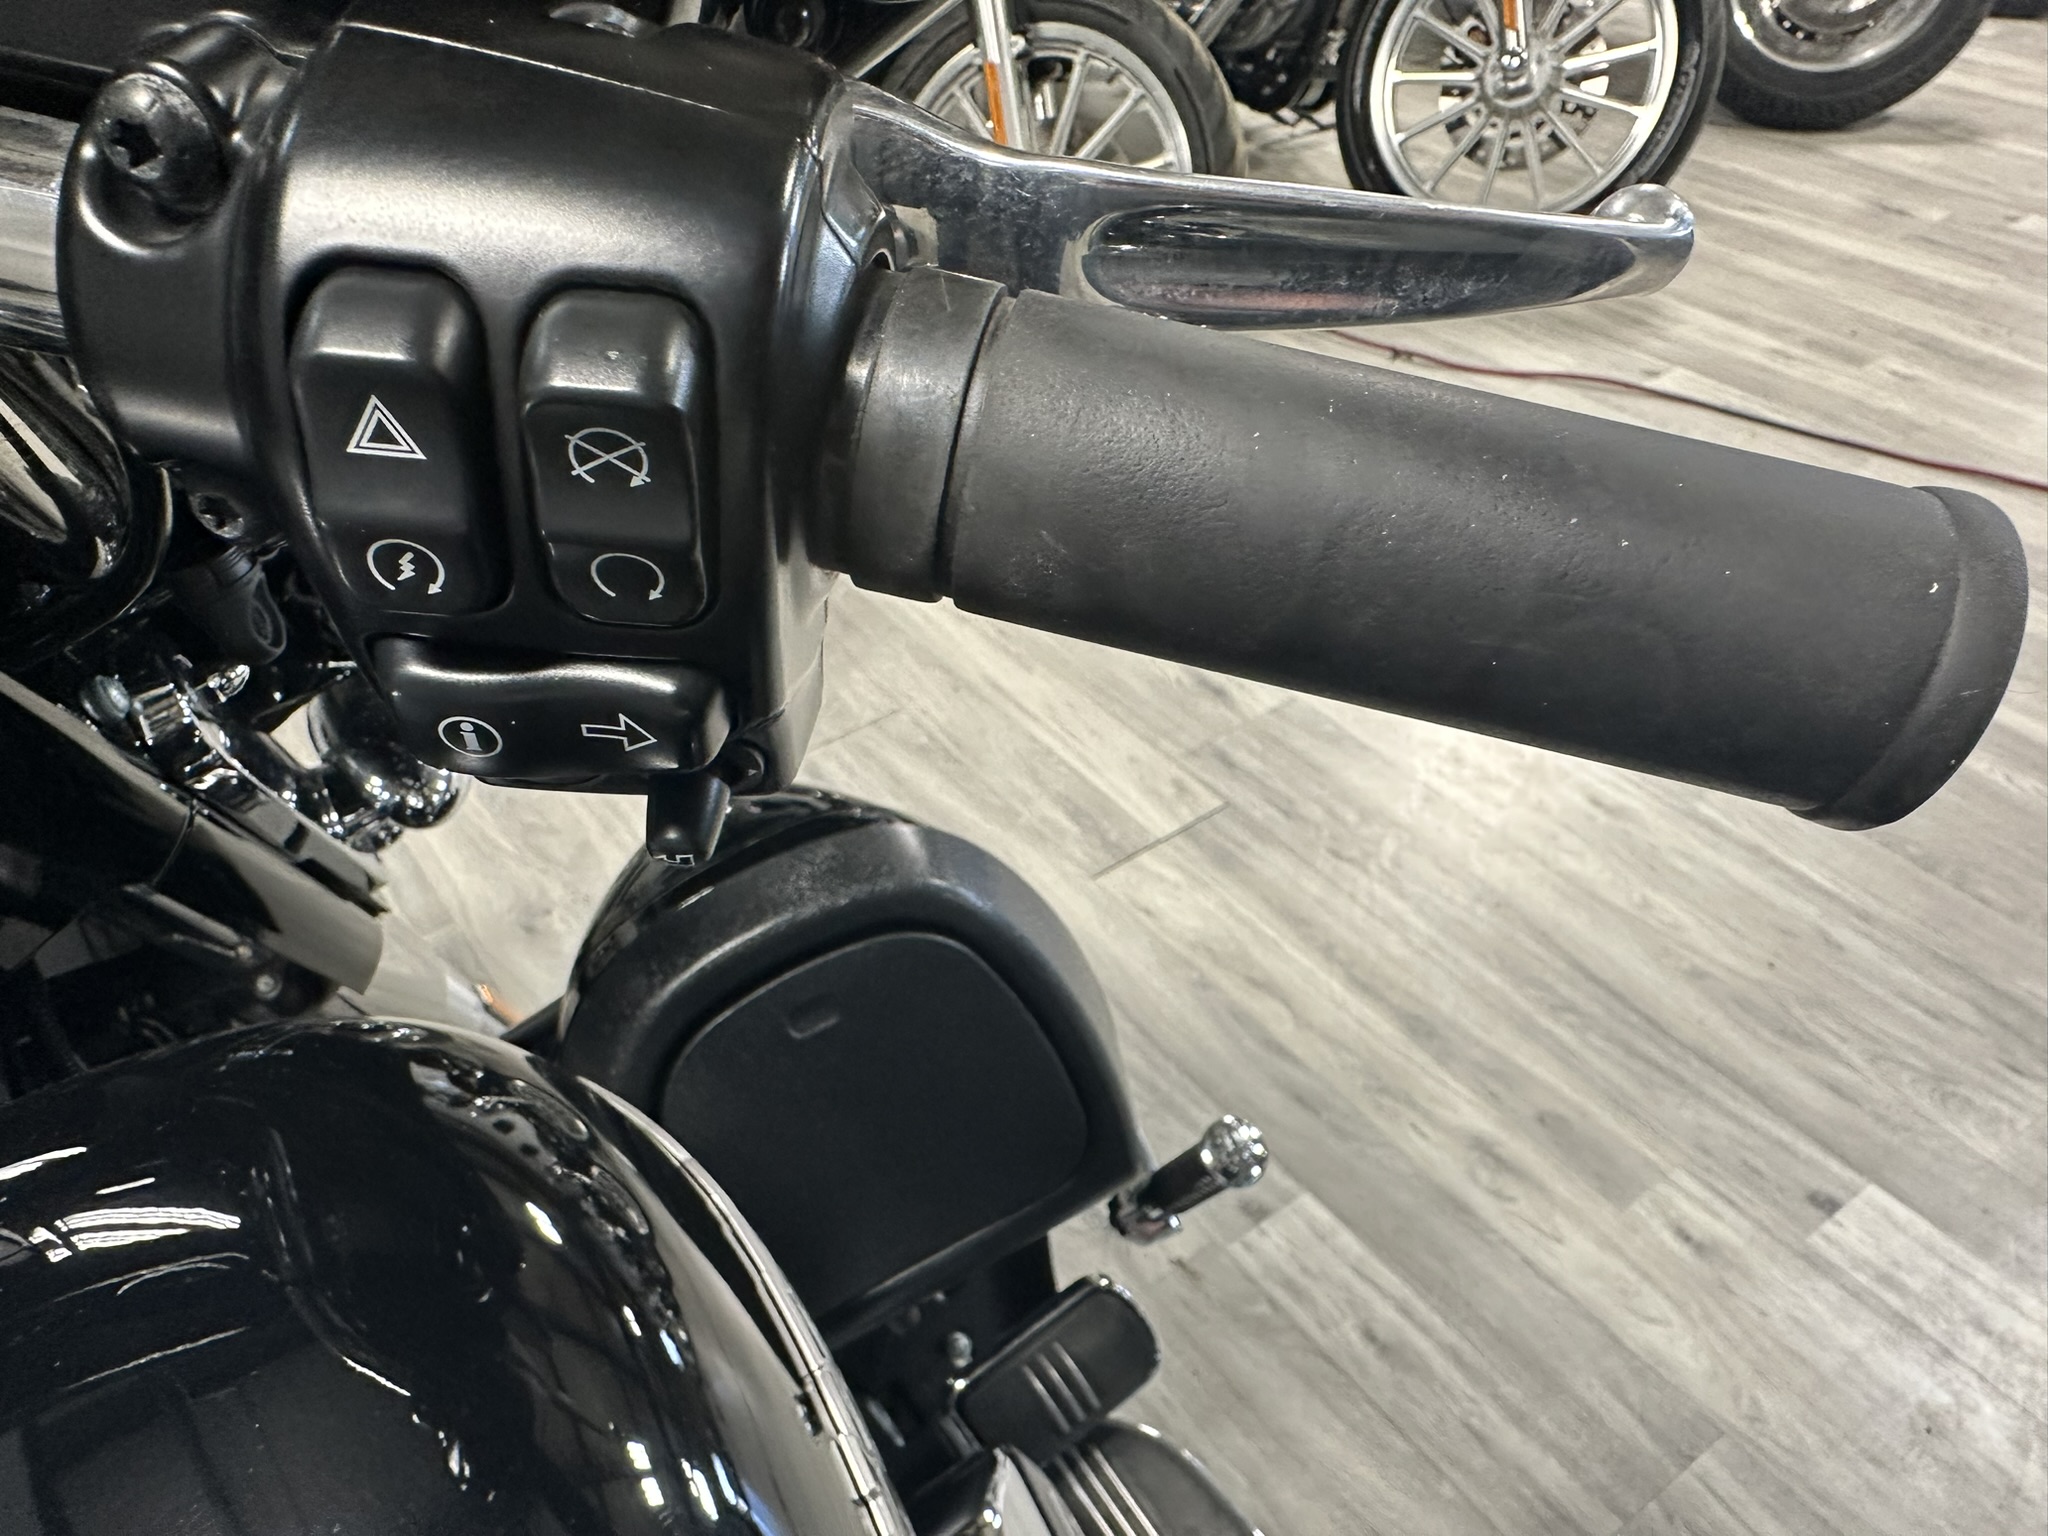 HARLEY DAVIDSON STREET GLIDE SPECIAL FOR SALE HOGTOWN CYCLES